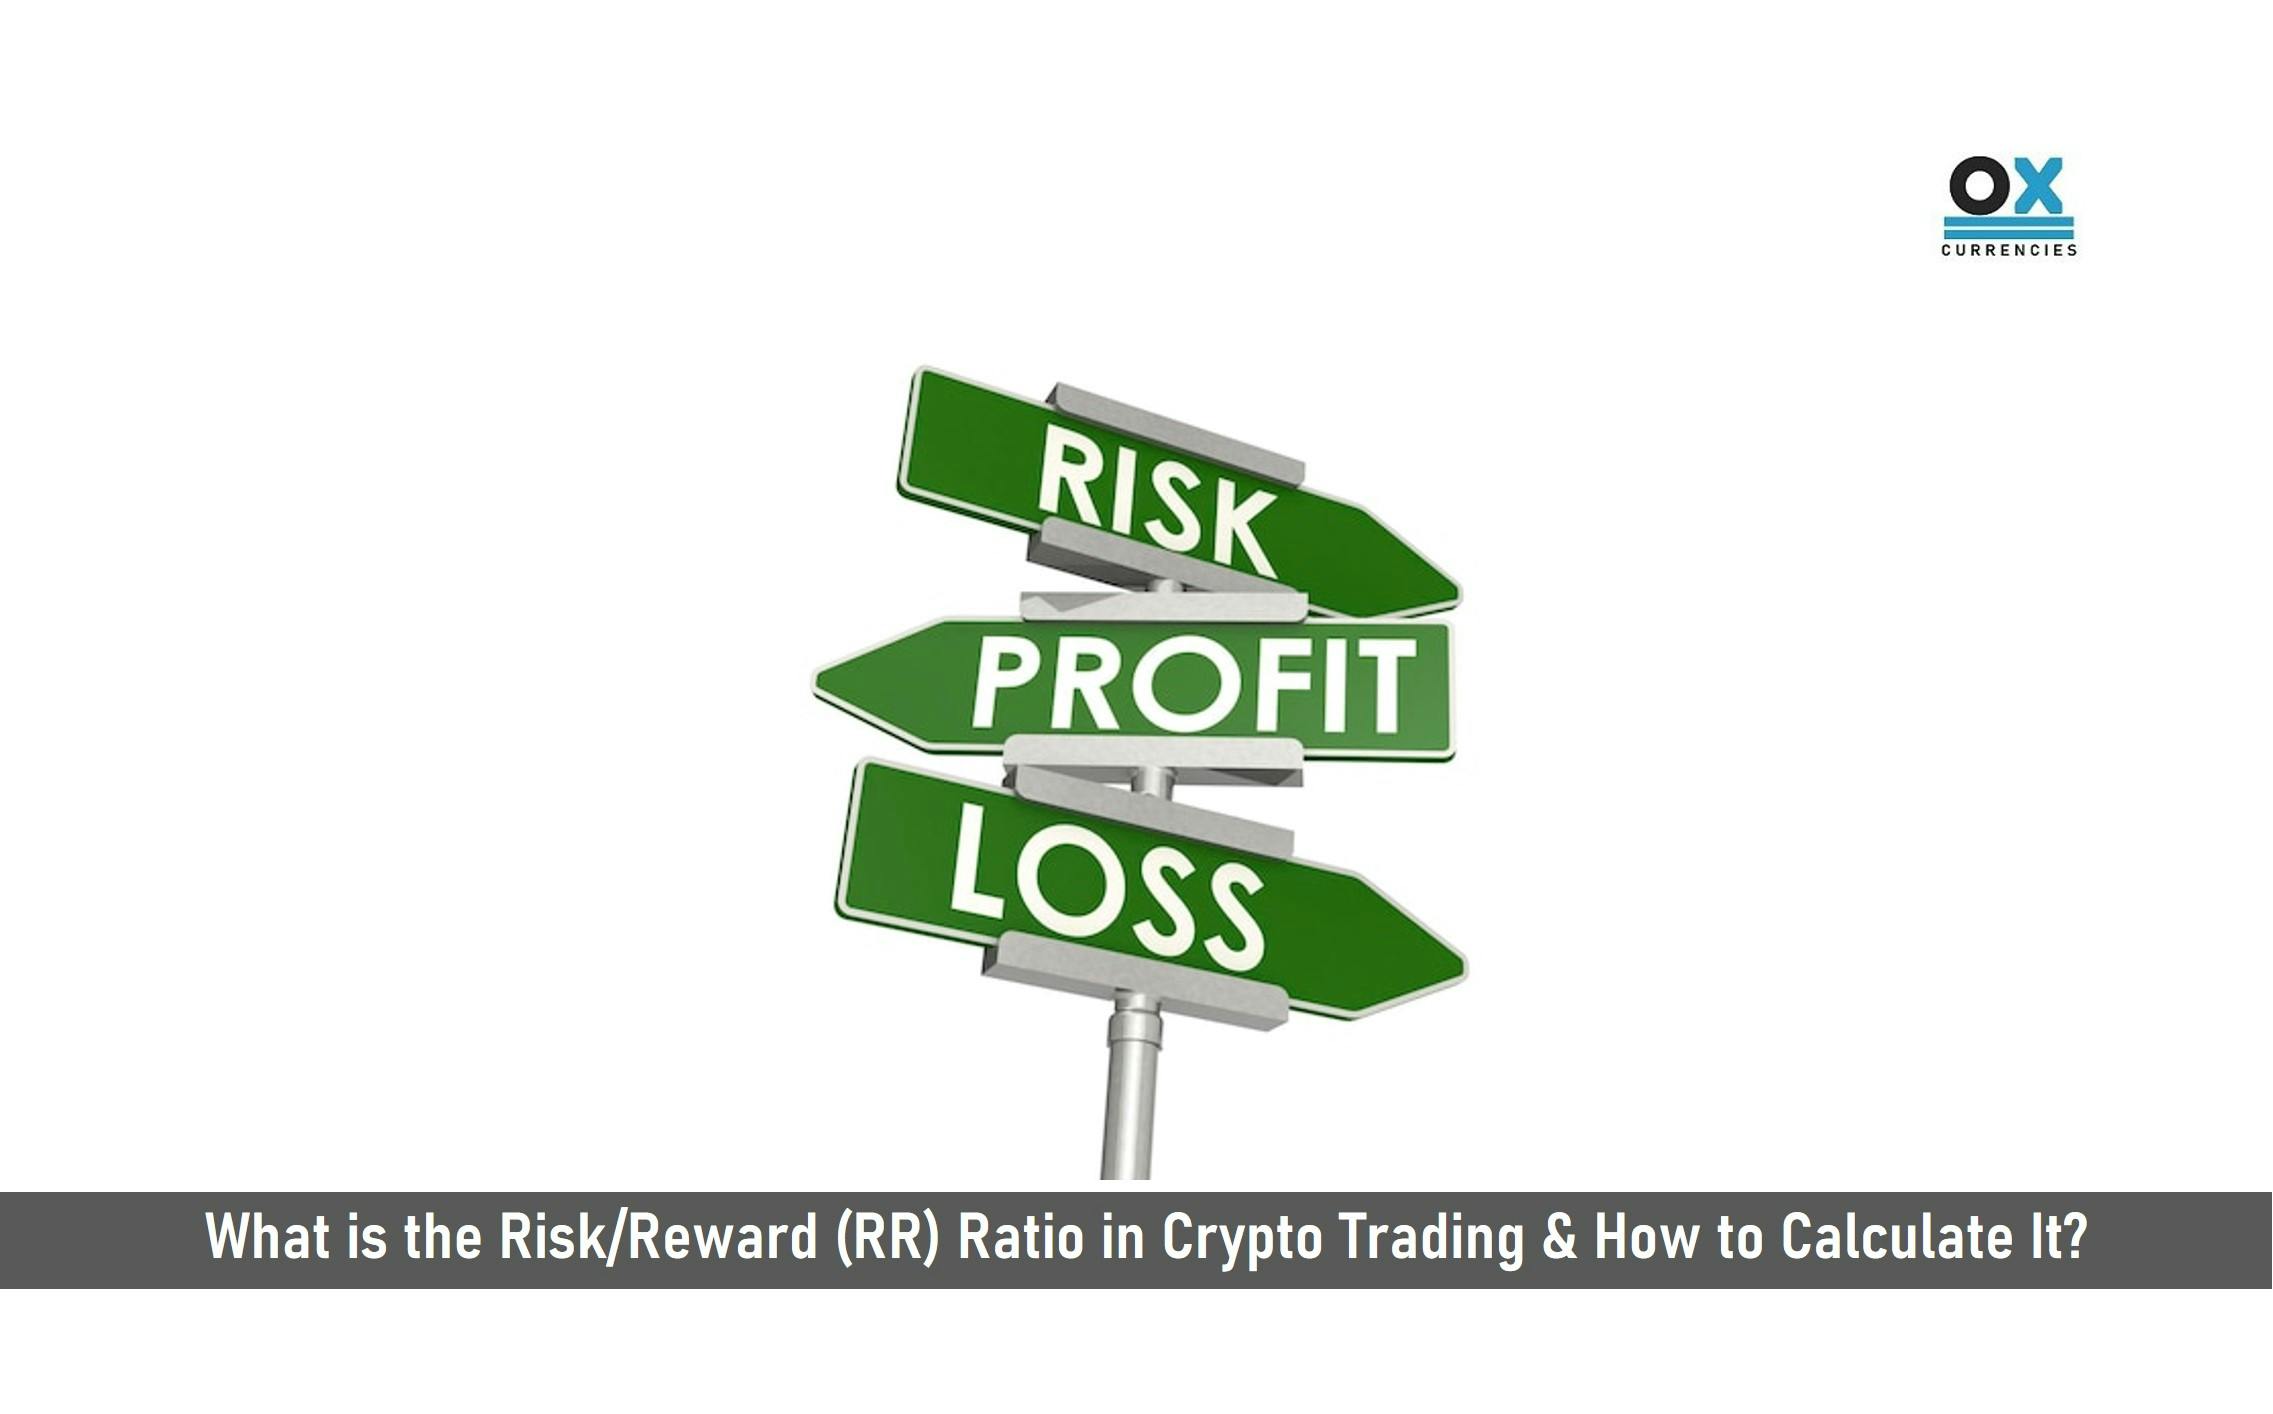 What is the Risk/Reward (RR) Ratio in Crypto Trading & How to Calculate It?